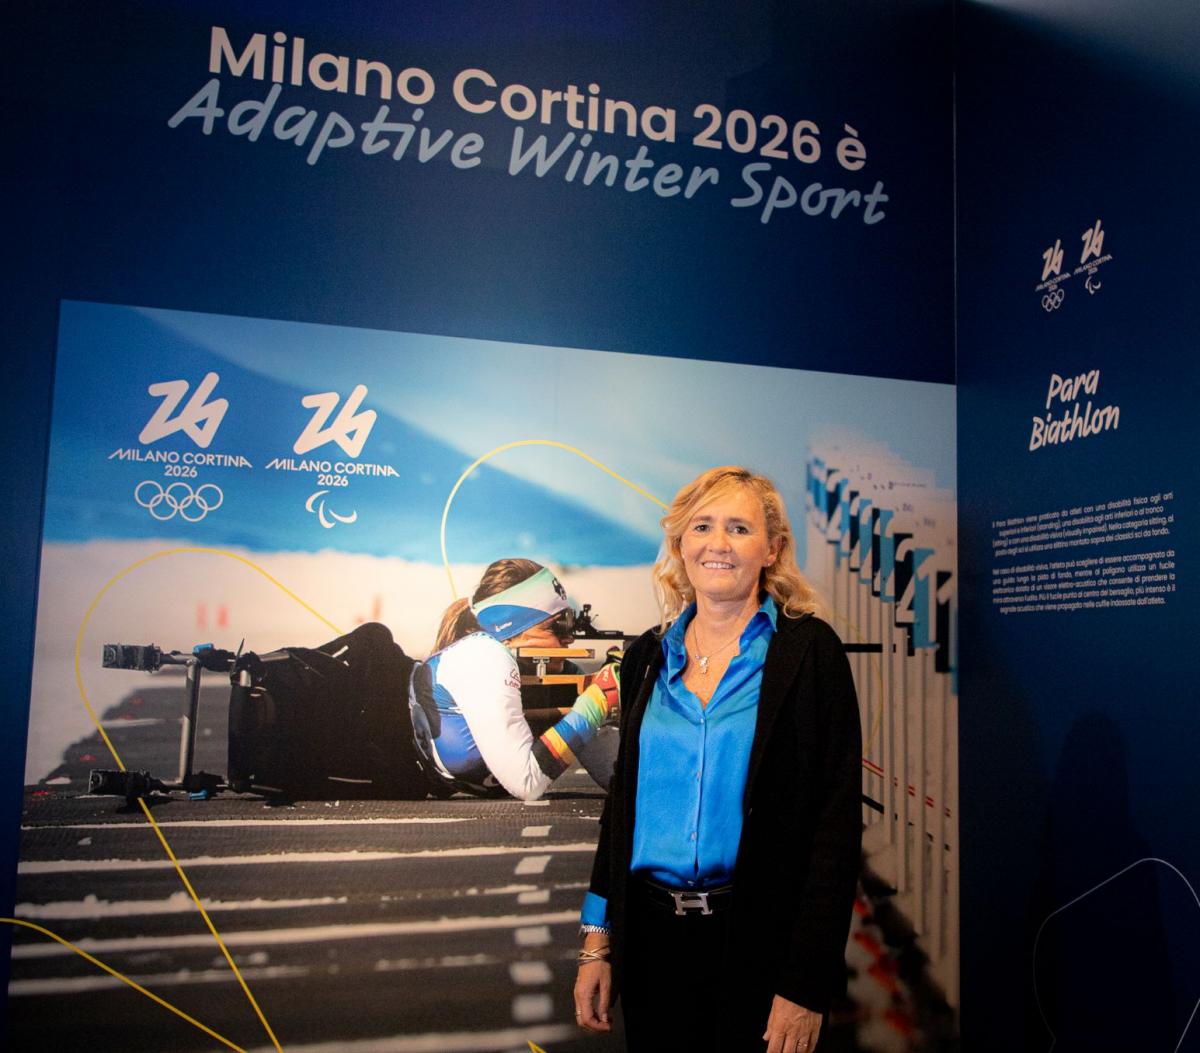 A woman in business attire poses in front of a poster featuring a Para biathlon athlete in action.